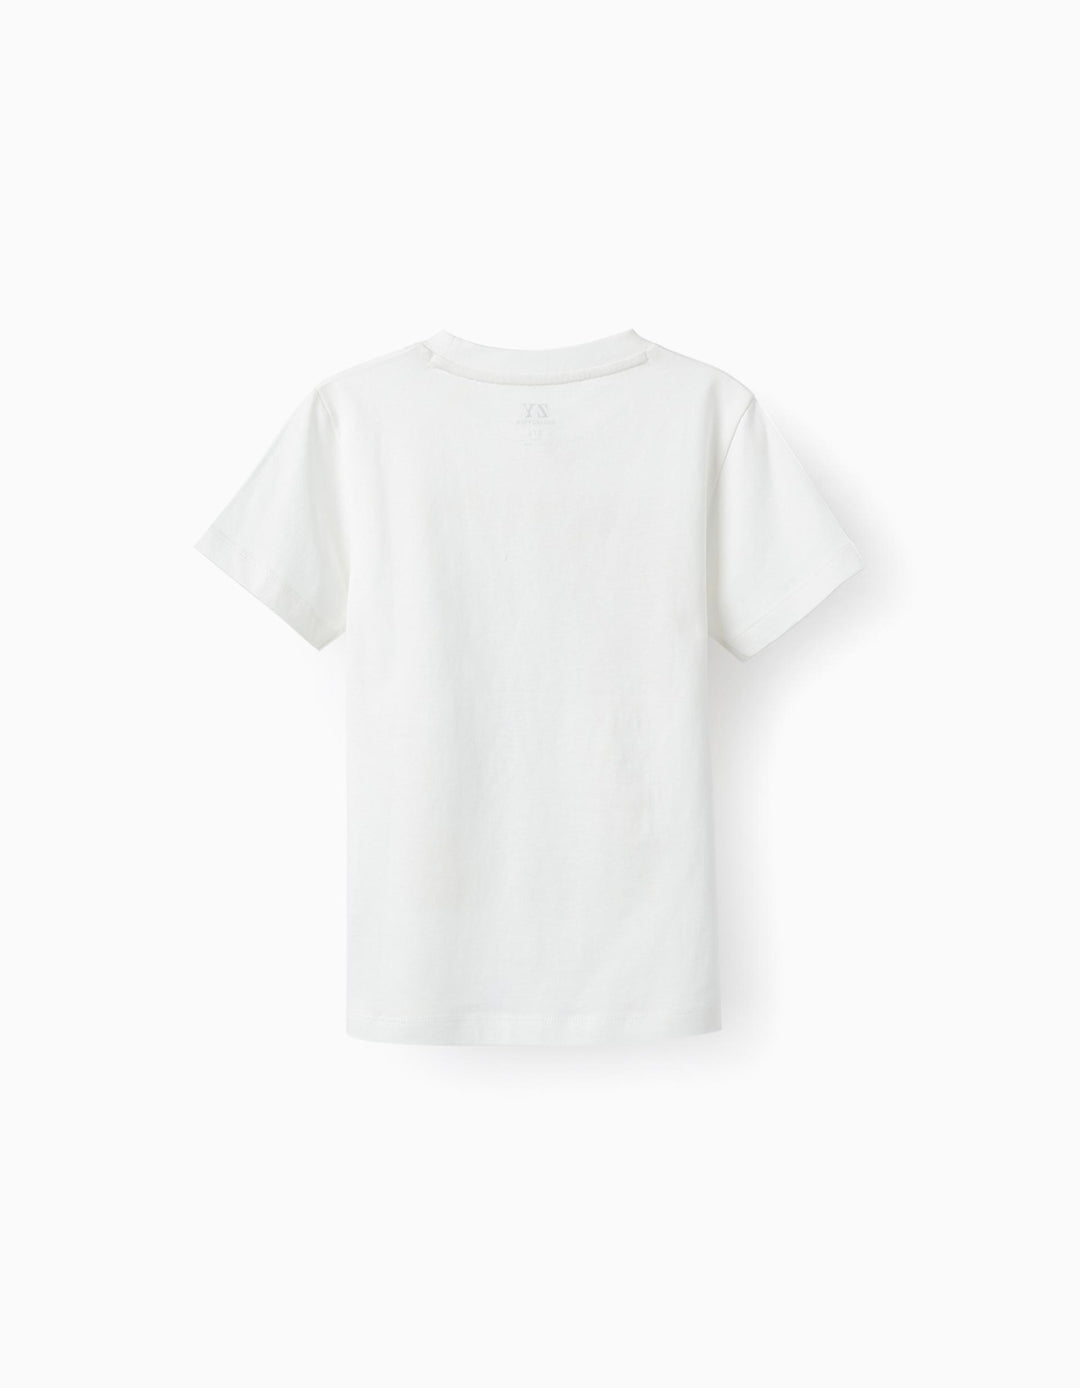 Cotton T-Shirt for boys 'Octopus', White